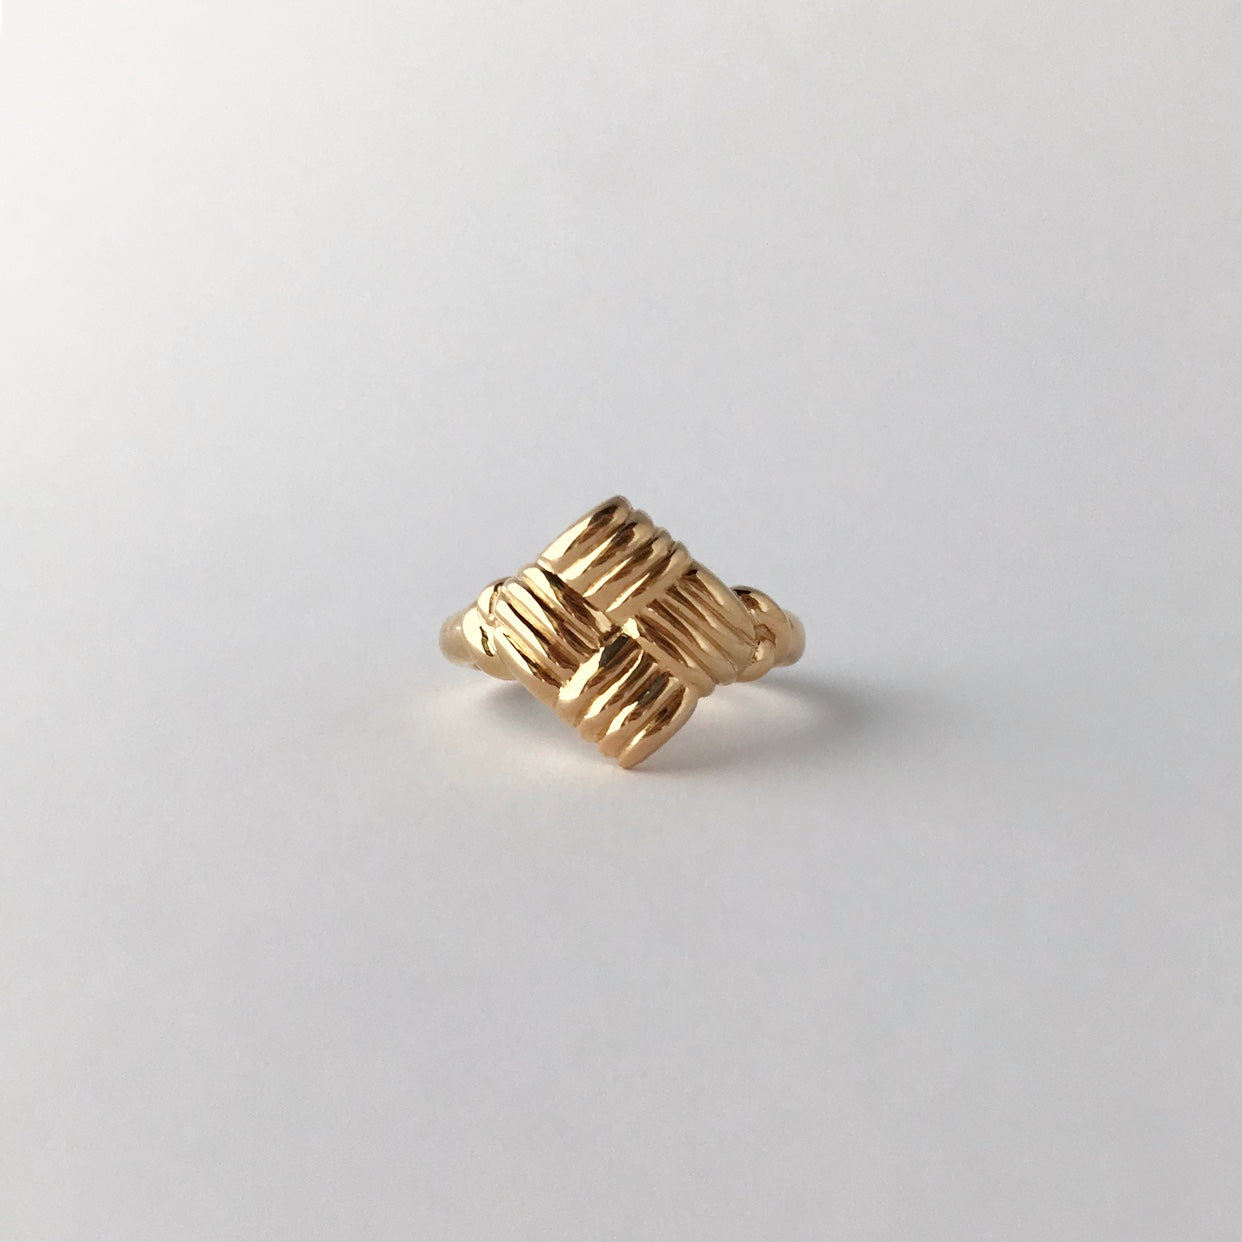 Twill weave ring